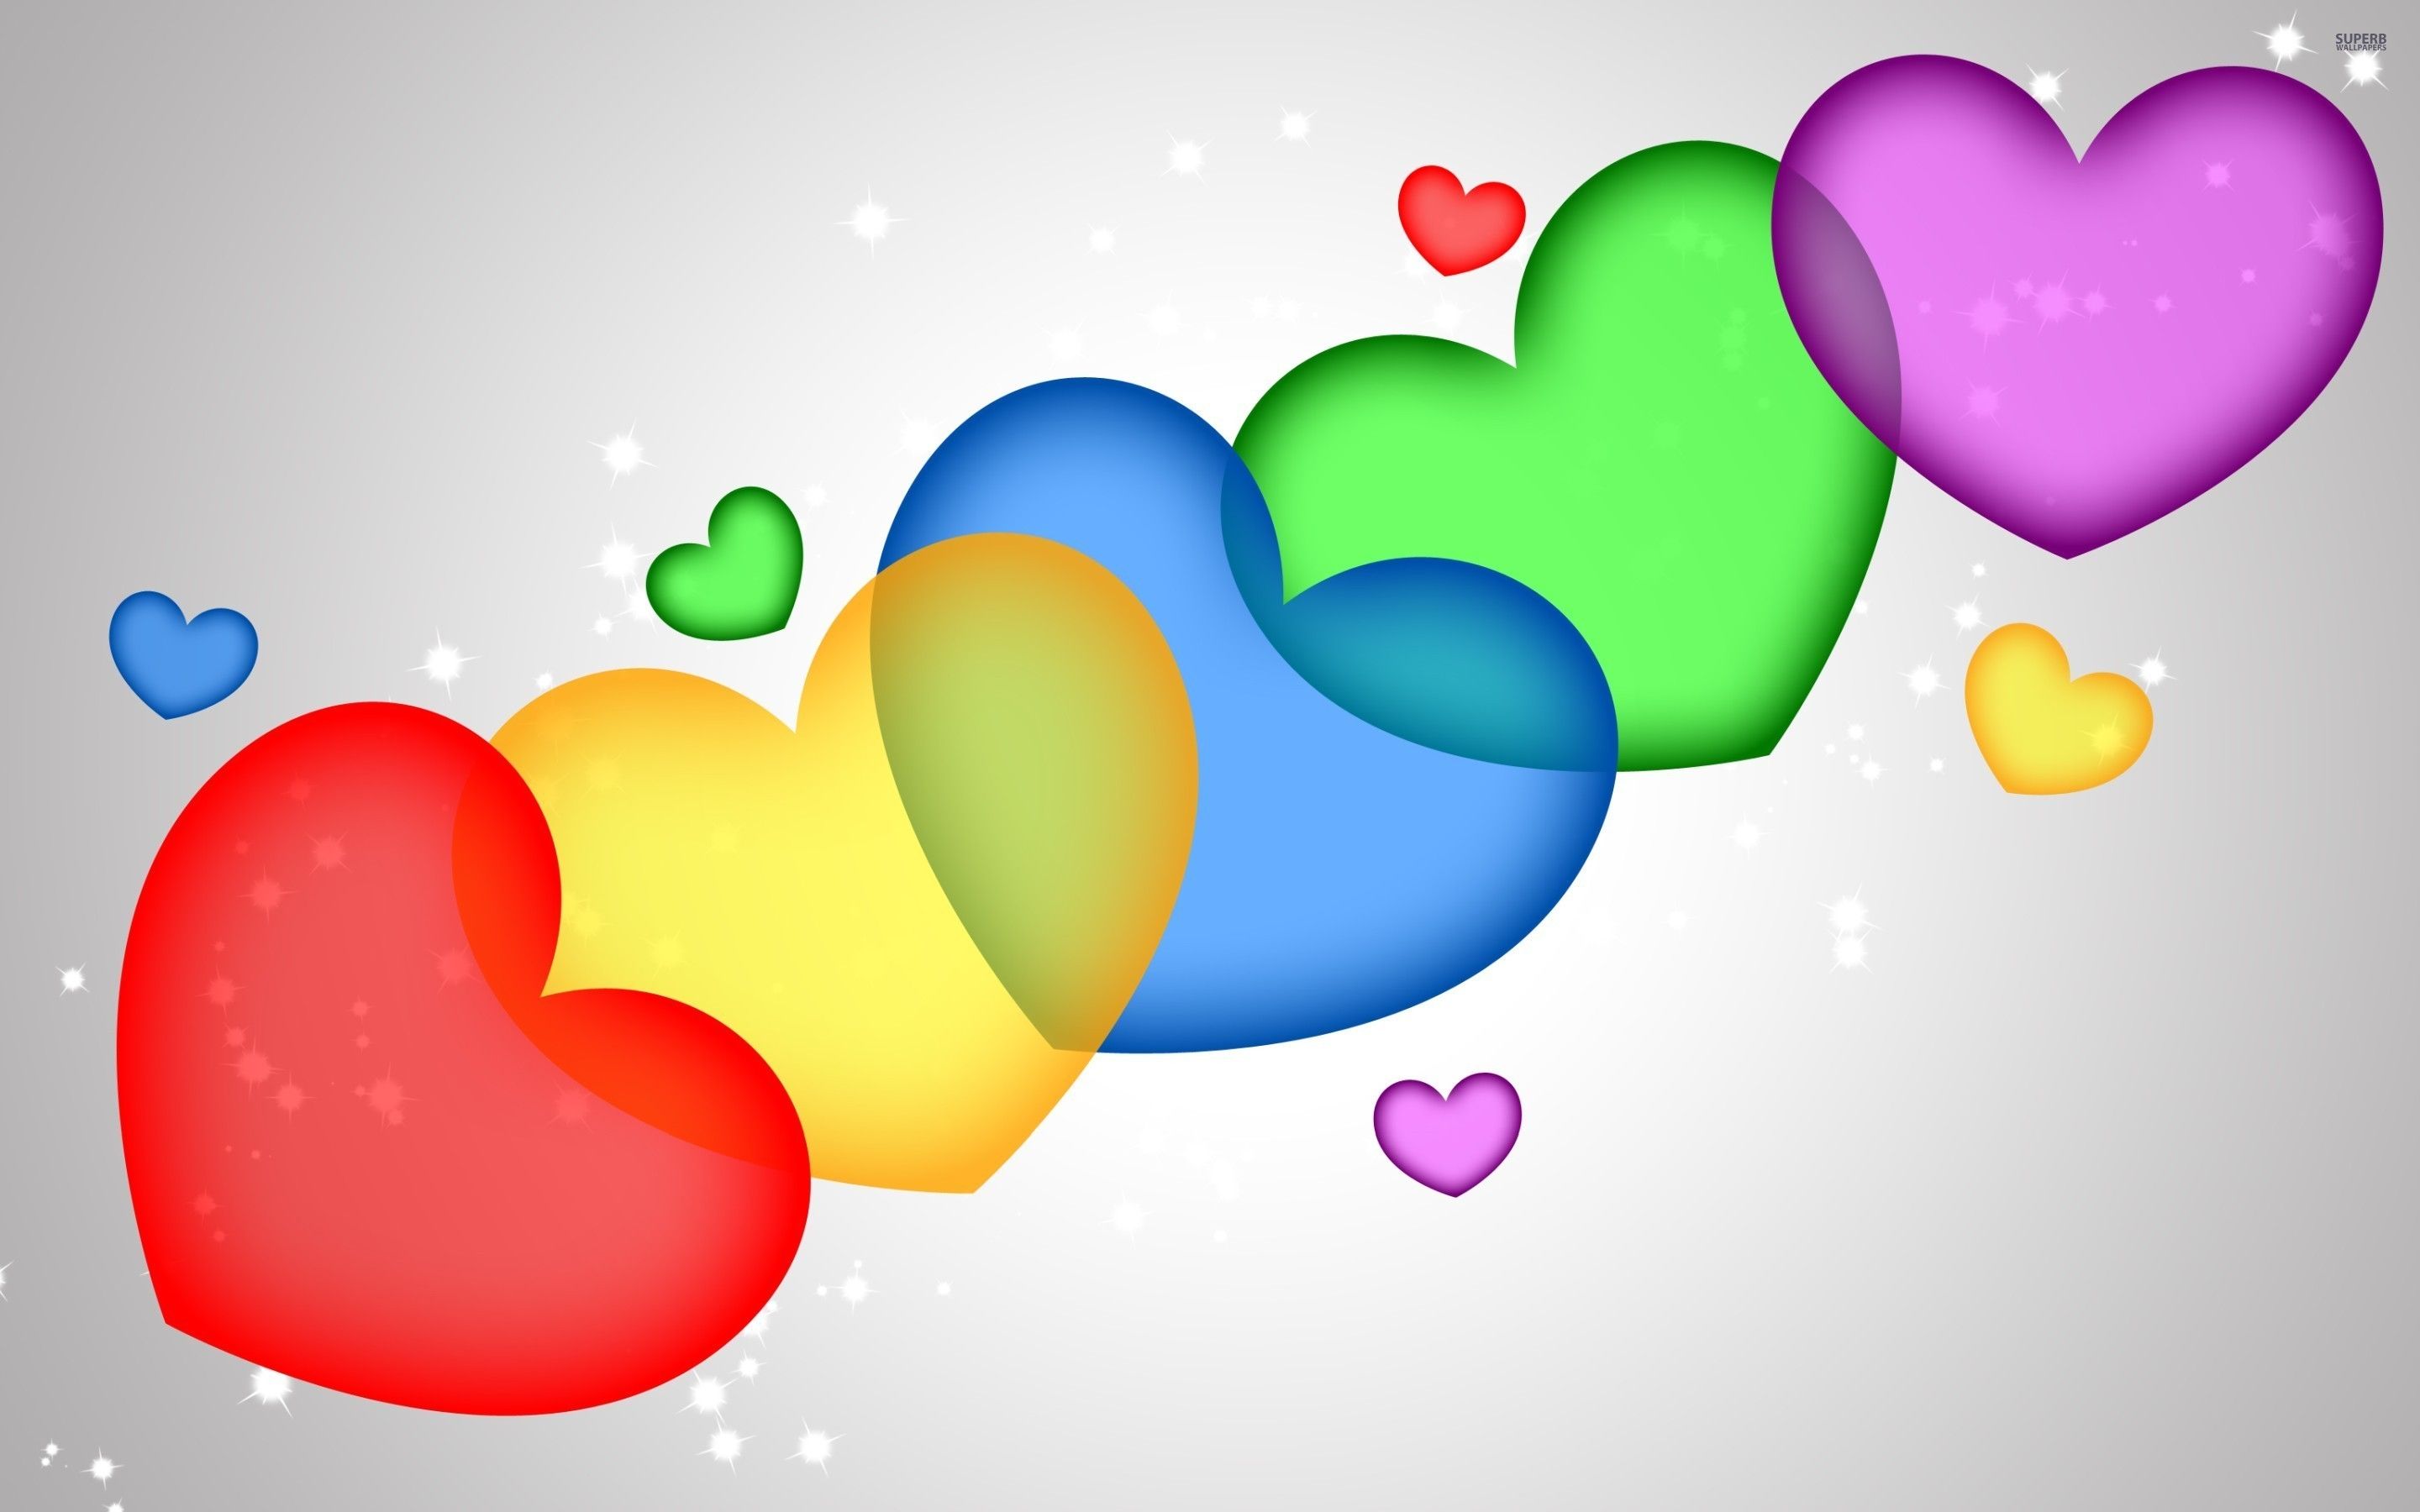 Colorful hearts wallpaper - Holiday wallpapers - #27366